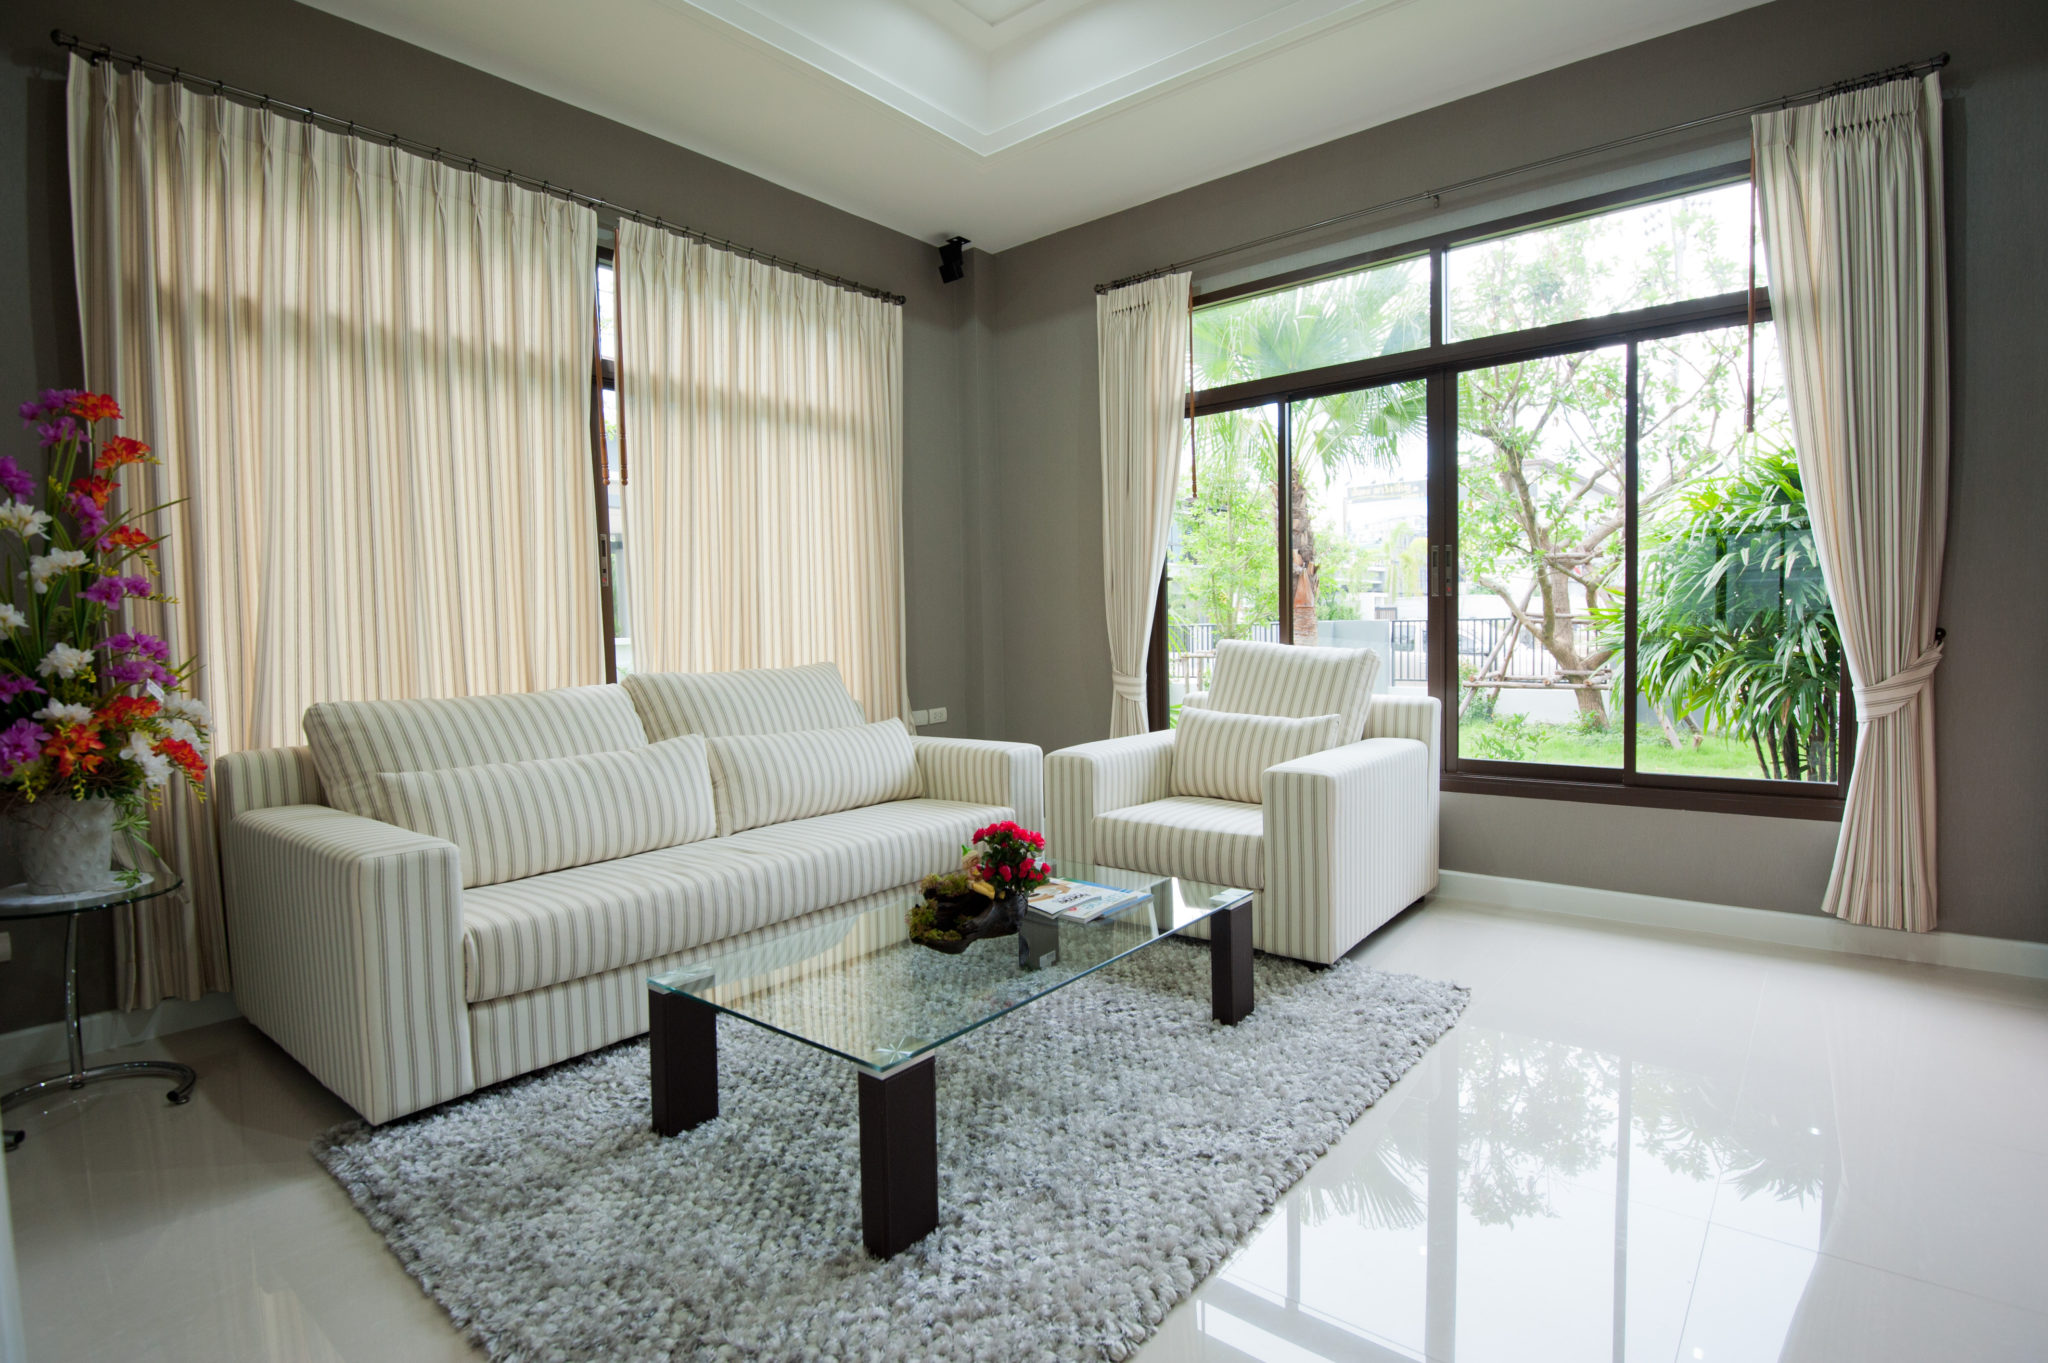 Reasons Why Your New Home Deserves Custom Drapes.